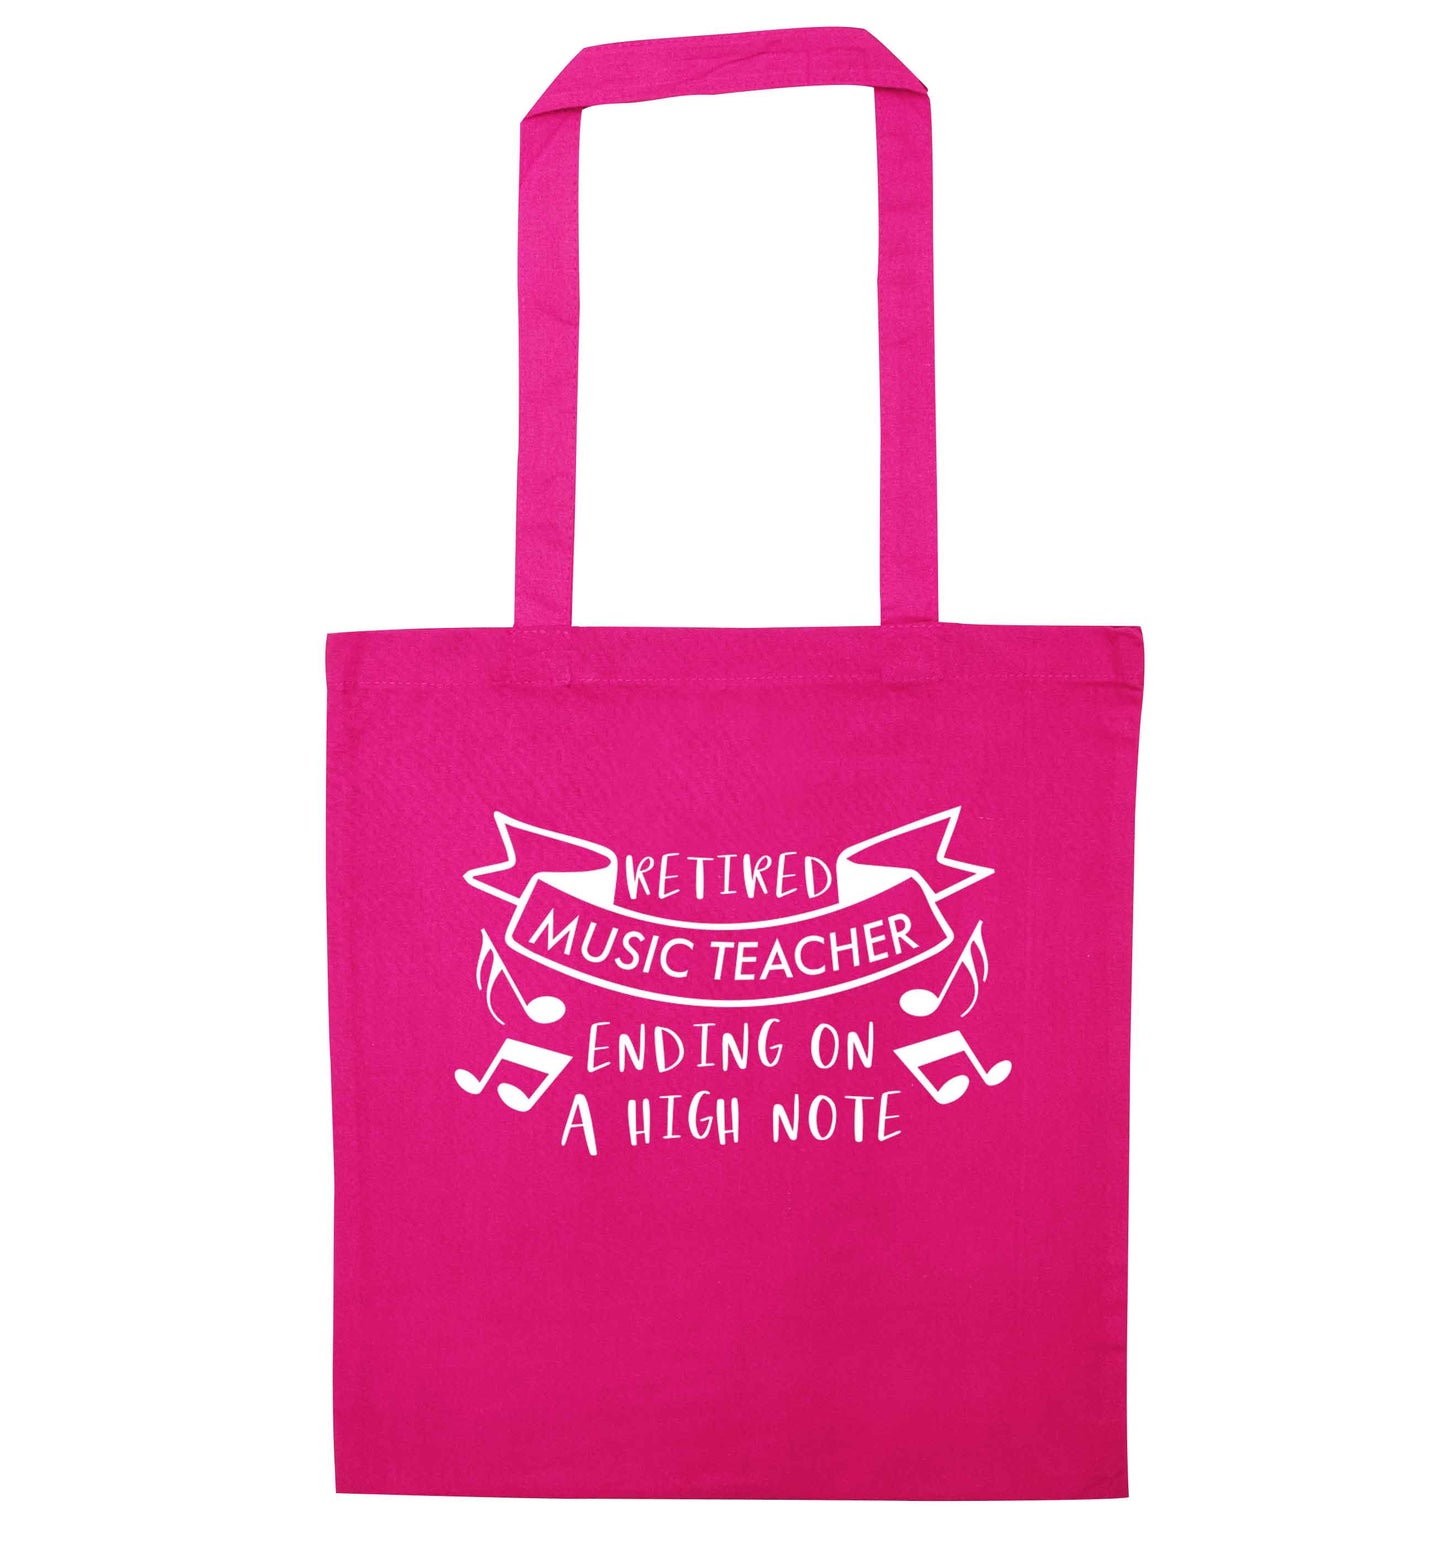 Retired music teacher ending on a high note pink tote bag